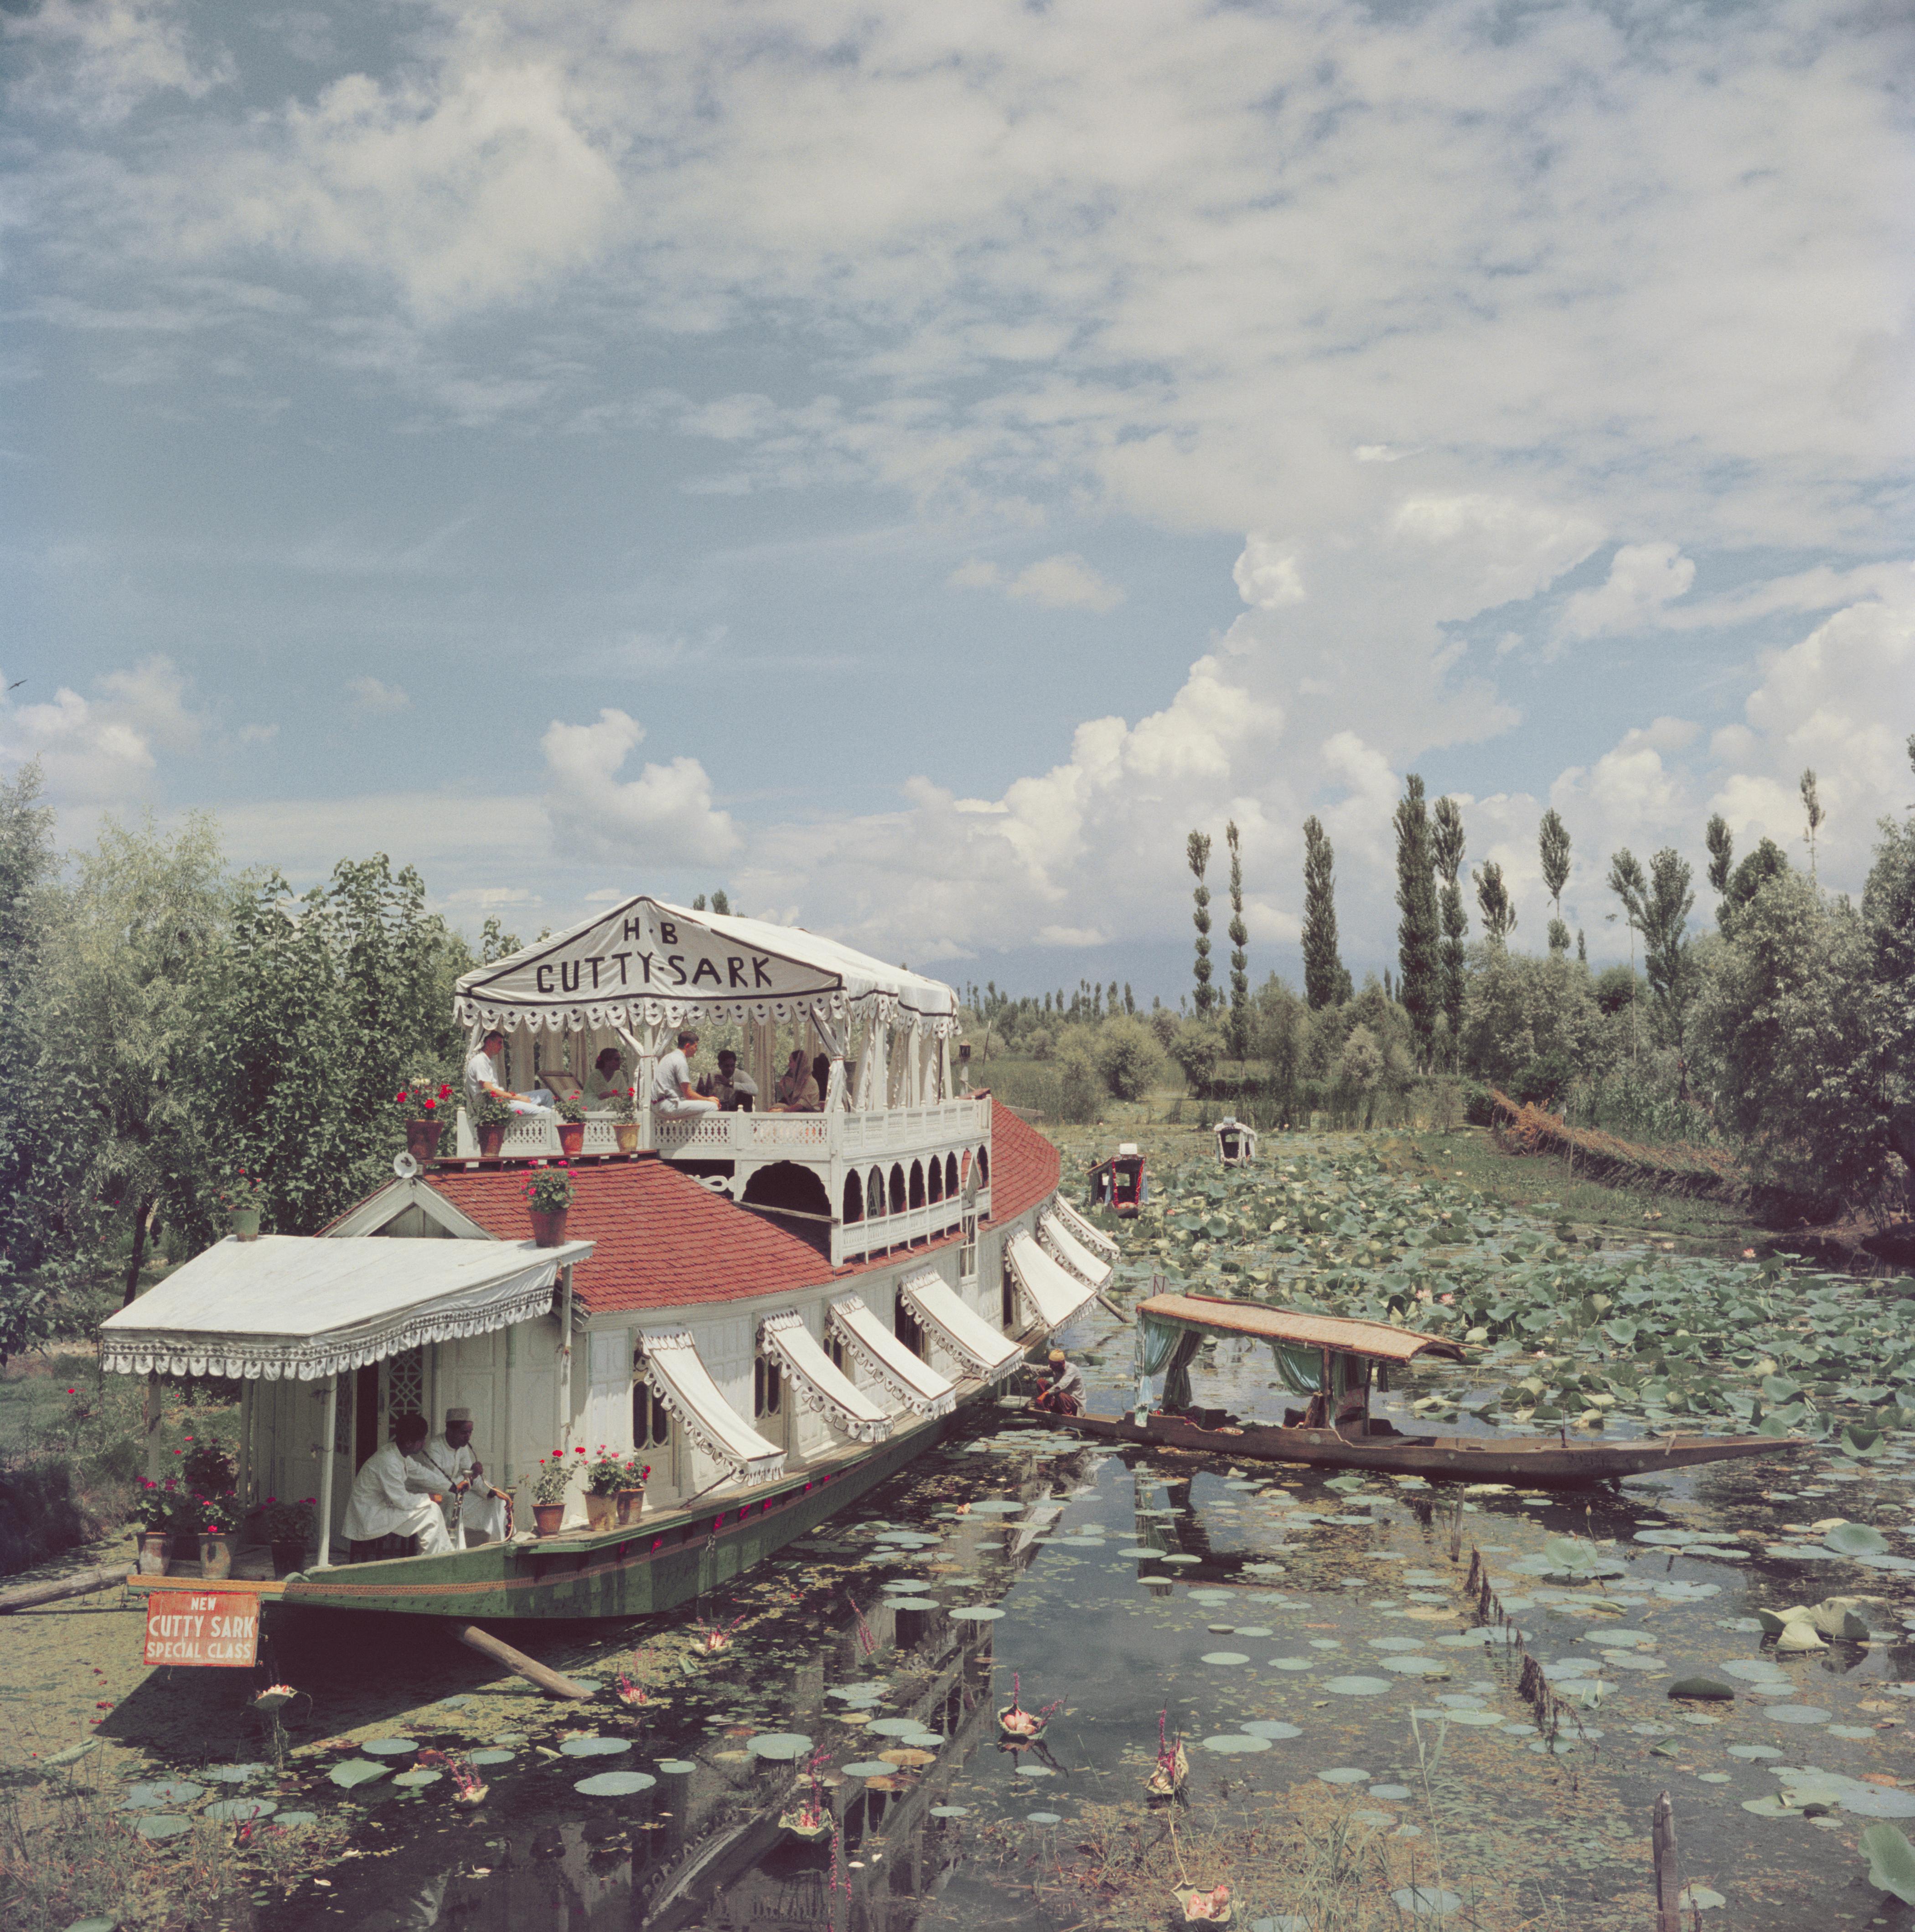 'Jhelum River' 1961 Slim Aarons Limited Estate Edition

A luxury boat trip on the Jhelum River near Srinagar, in Jammu and Kashmir, India, 1961. The boat is called the ‘HB Cutty Sark’. (Photo by Slim Aarons)

C Print
Produced from the original